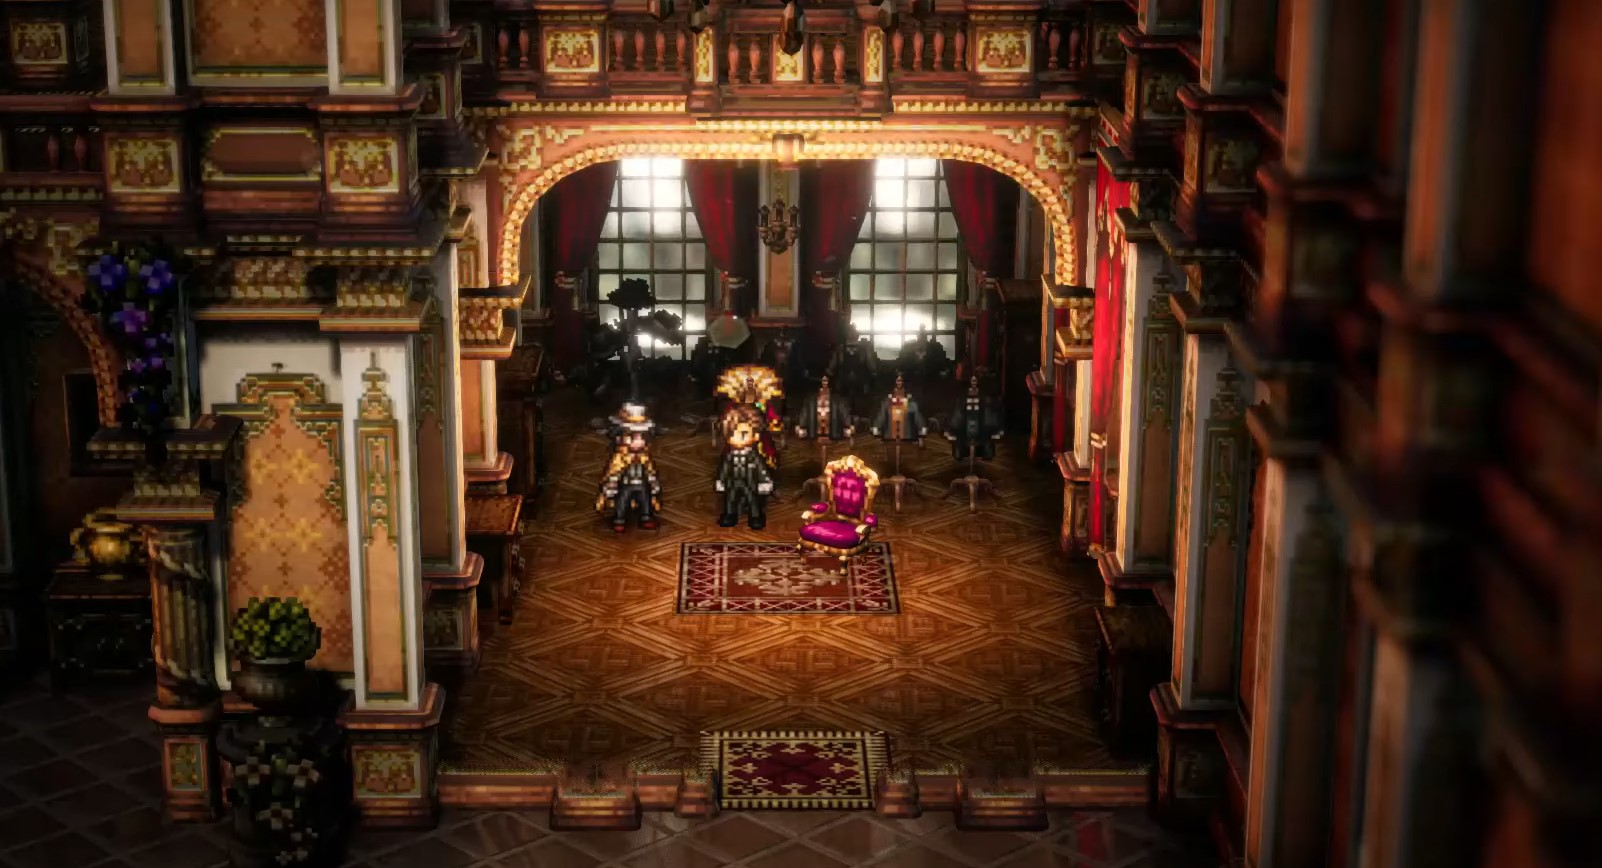 Octopath Traveler 2 exp farming - level up fast two characters in house interior